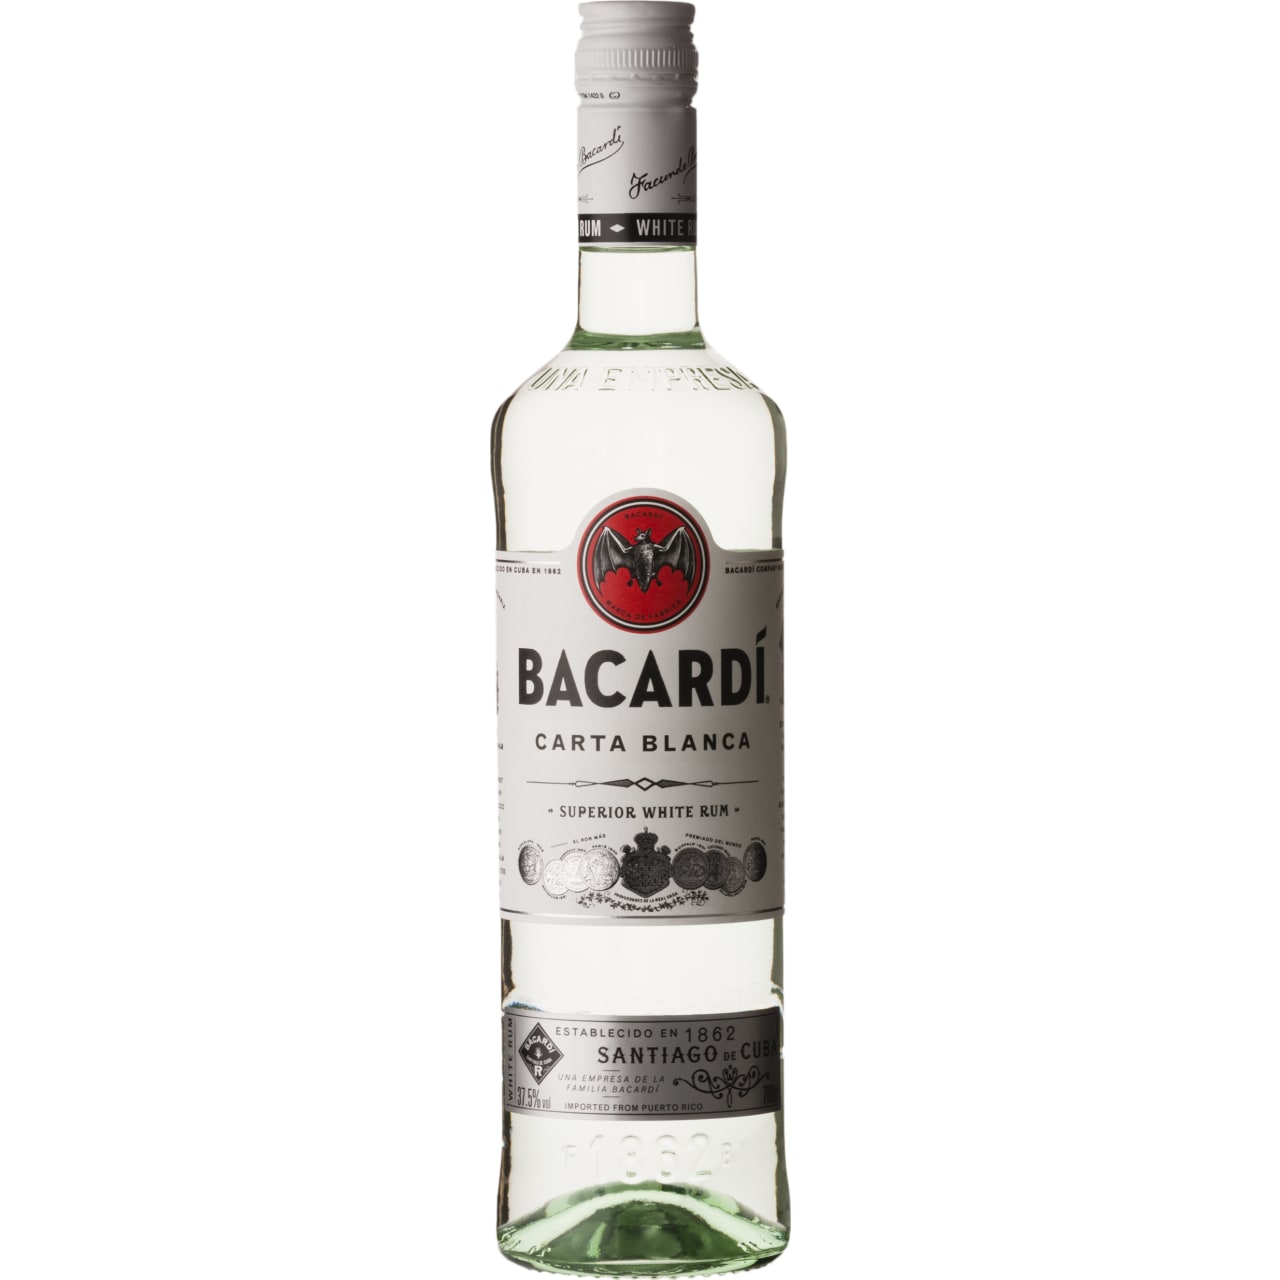 Floral and fruity, BACARDÍ Carta Blanca rum serves up orange blossom, lavender and rose, teamed with apricot, lime, light coconut and ripe banana.